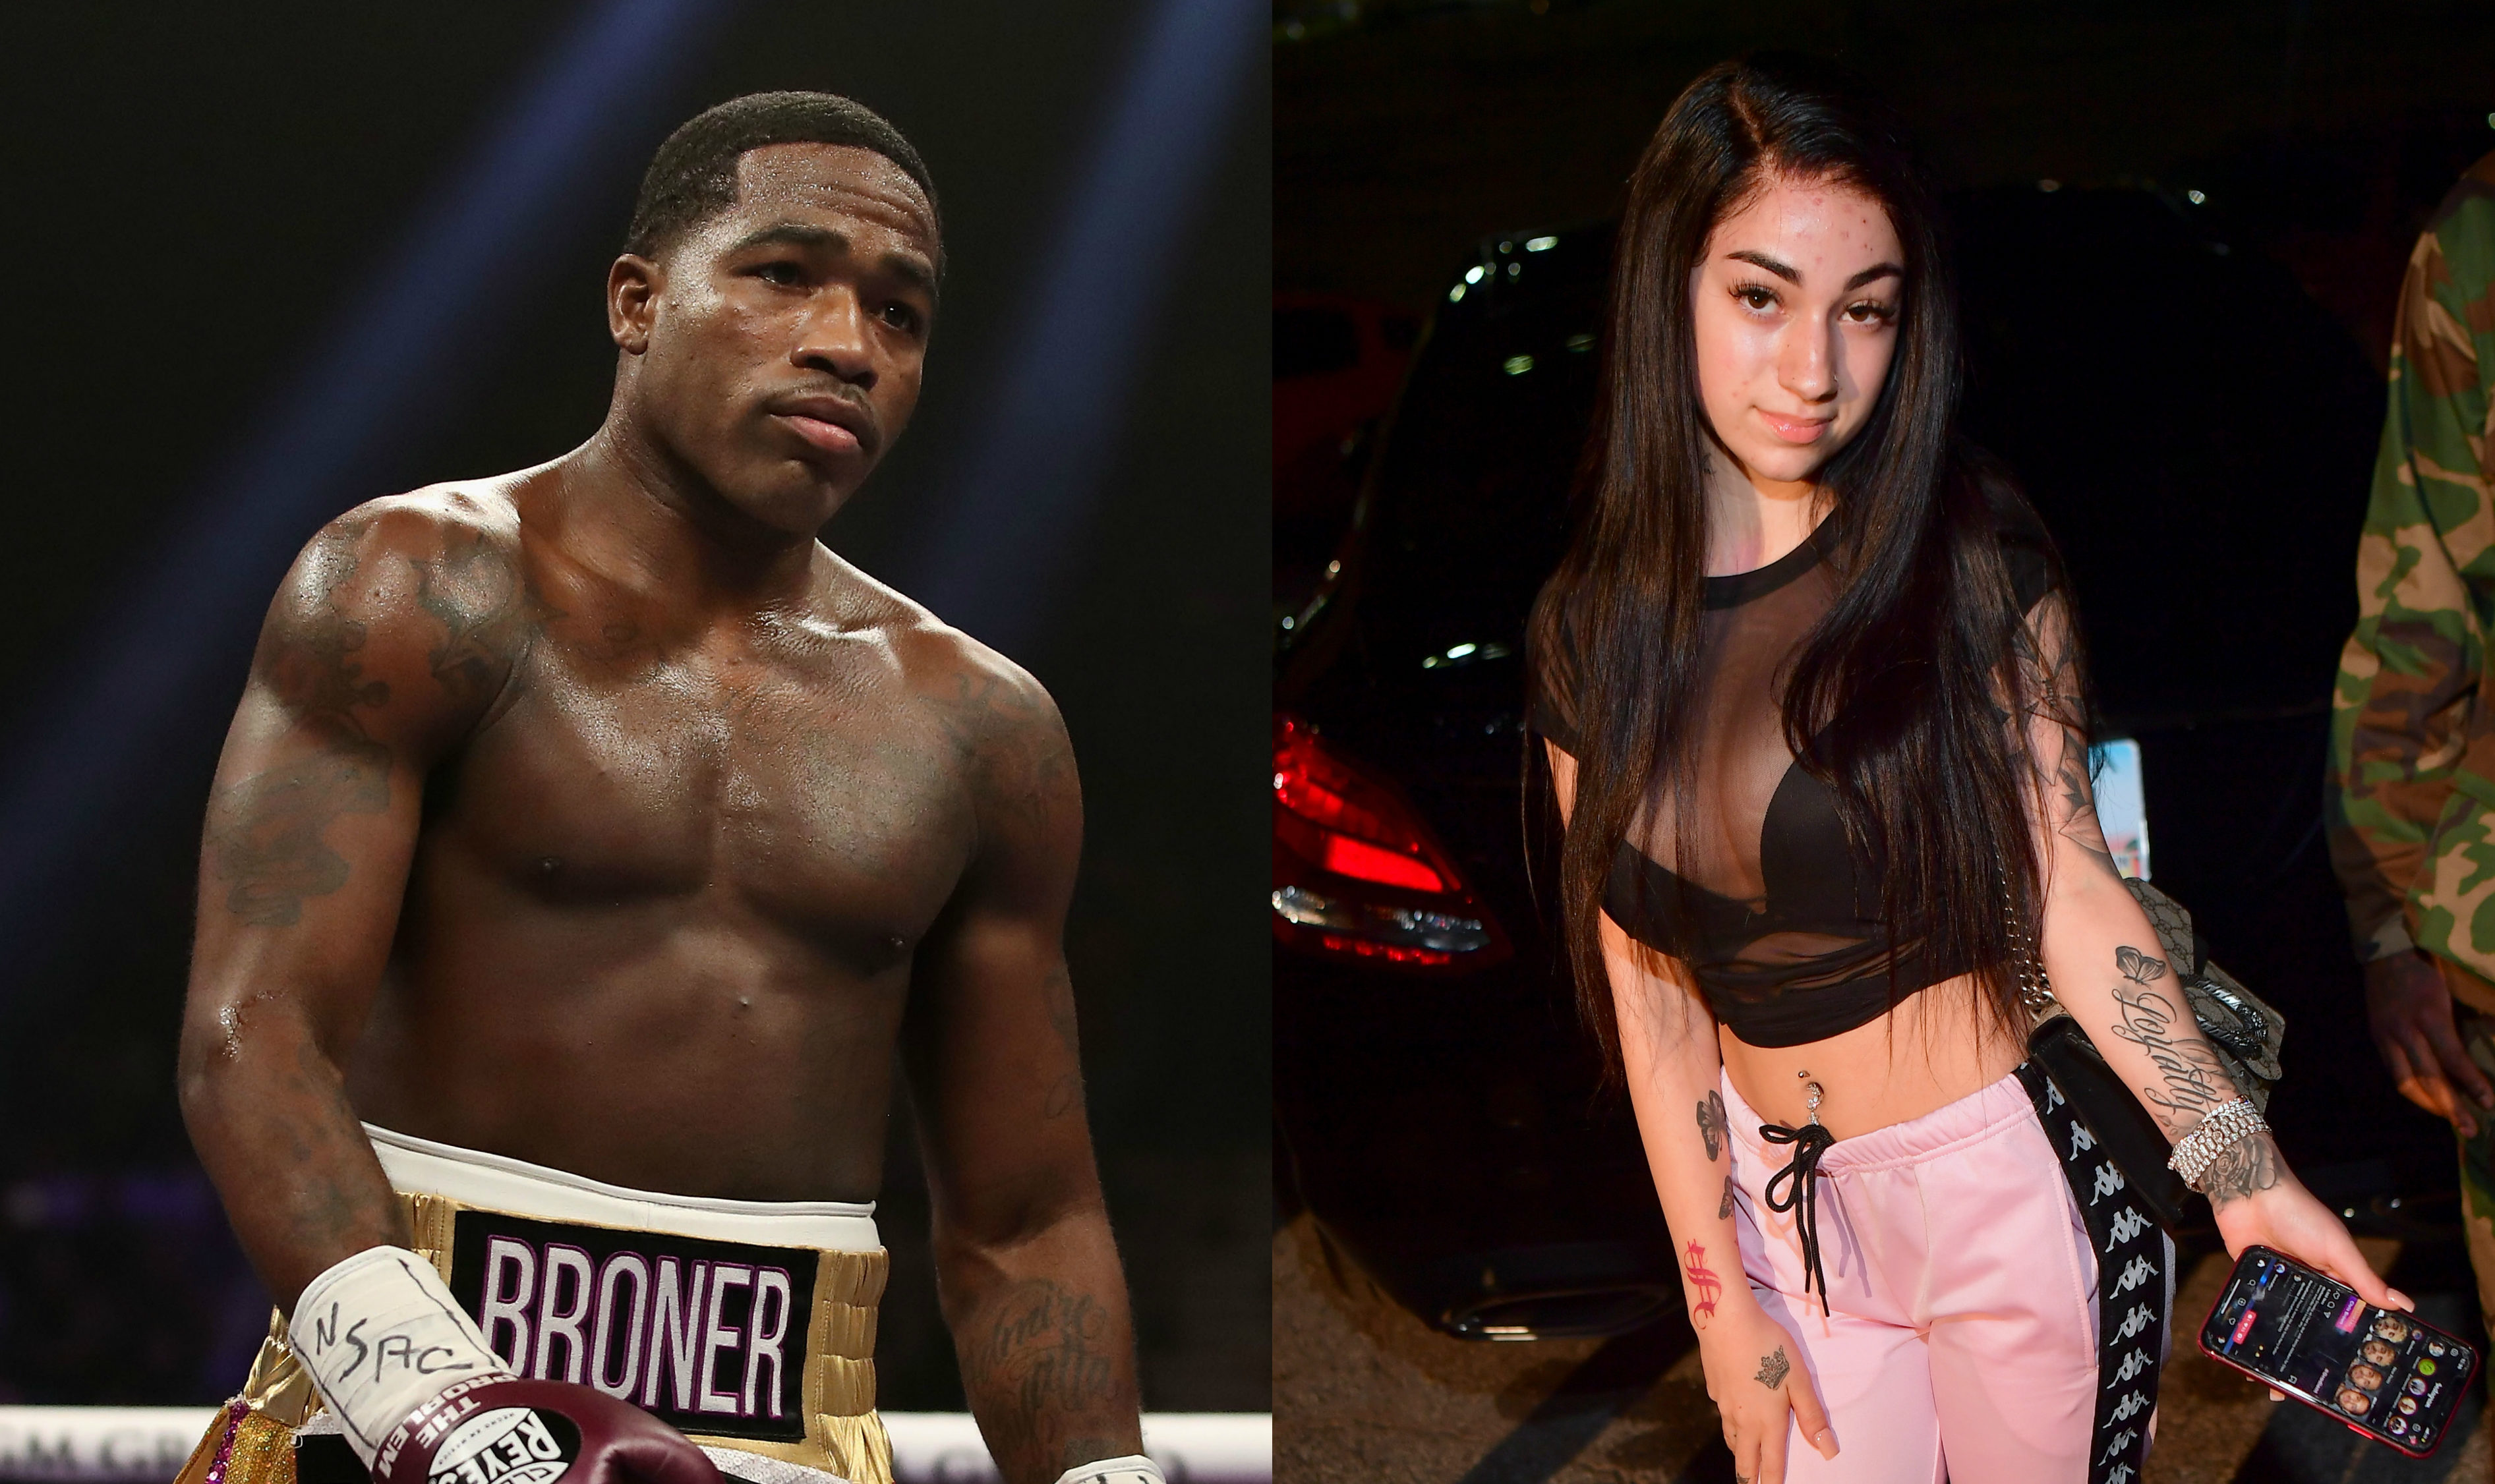 Adrien broner hinted in a series of alarming social media posts that he pla...